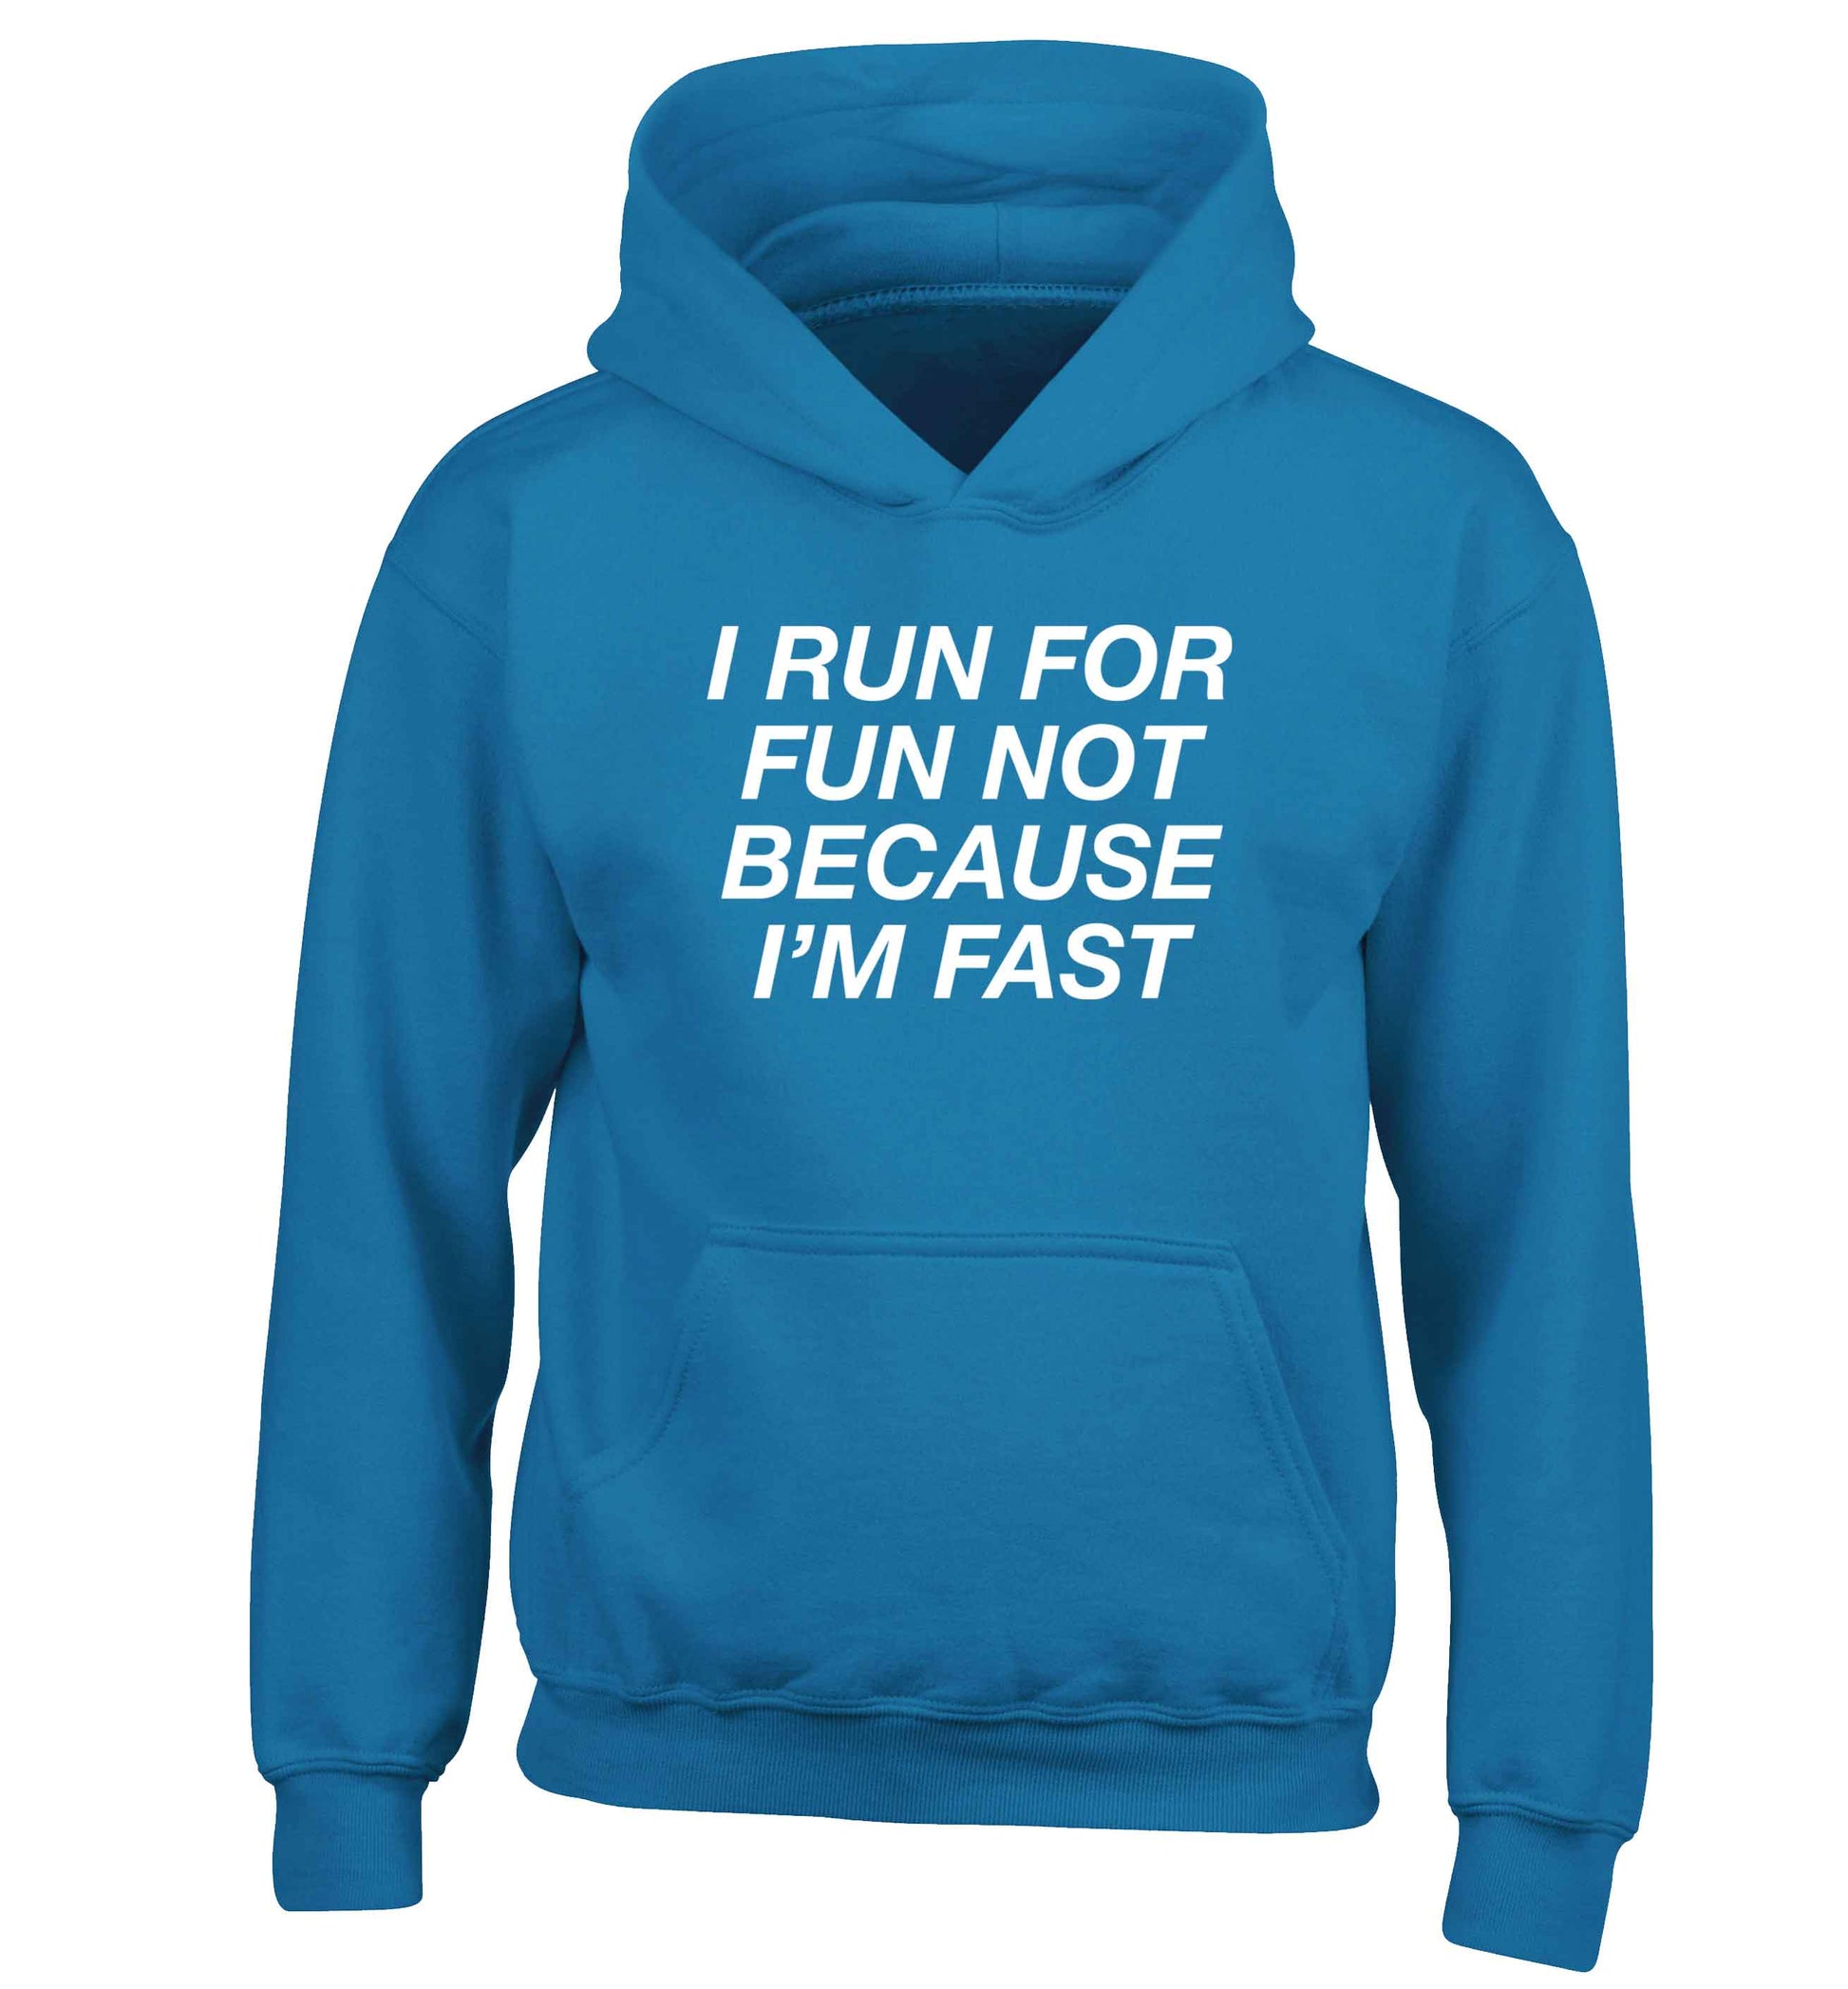 I run for fun not because I'm fast children's blue hoodie 12-13 Years